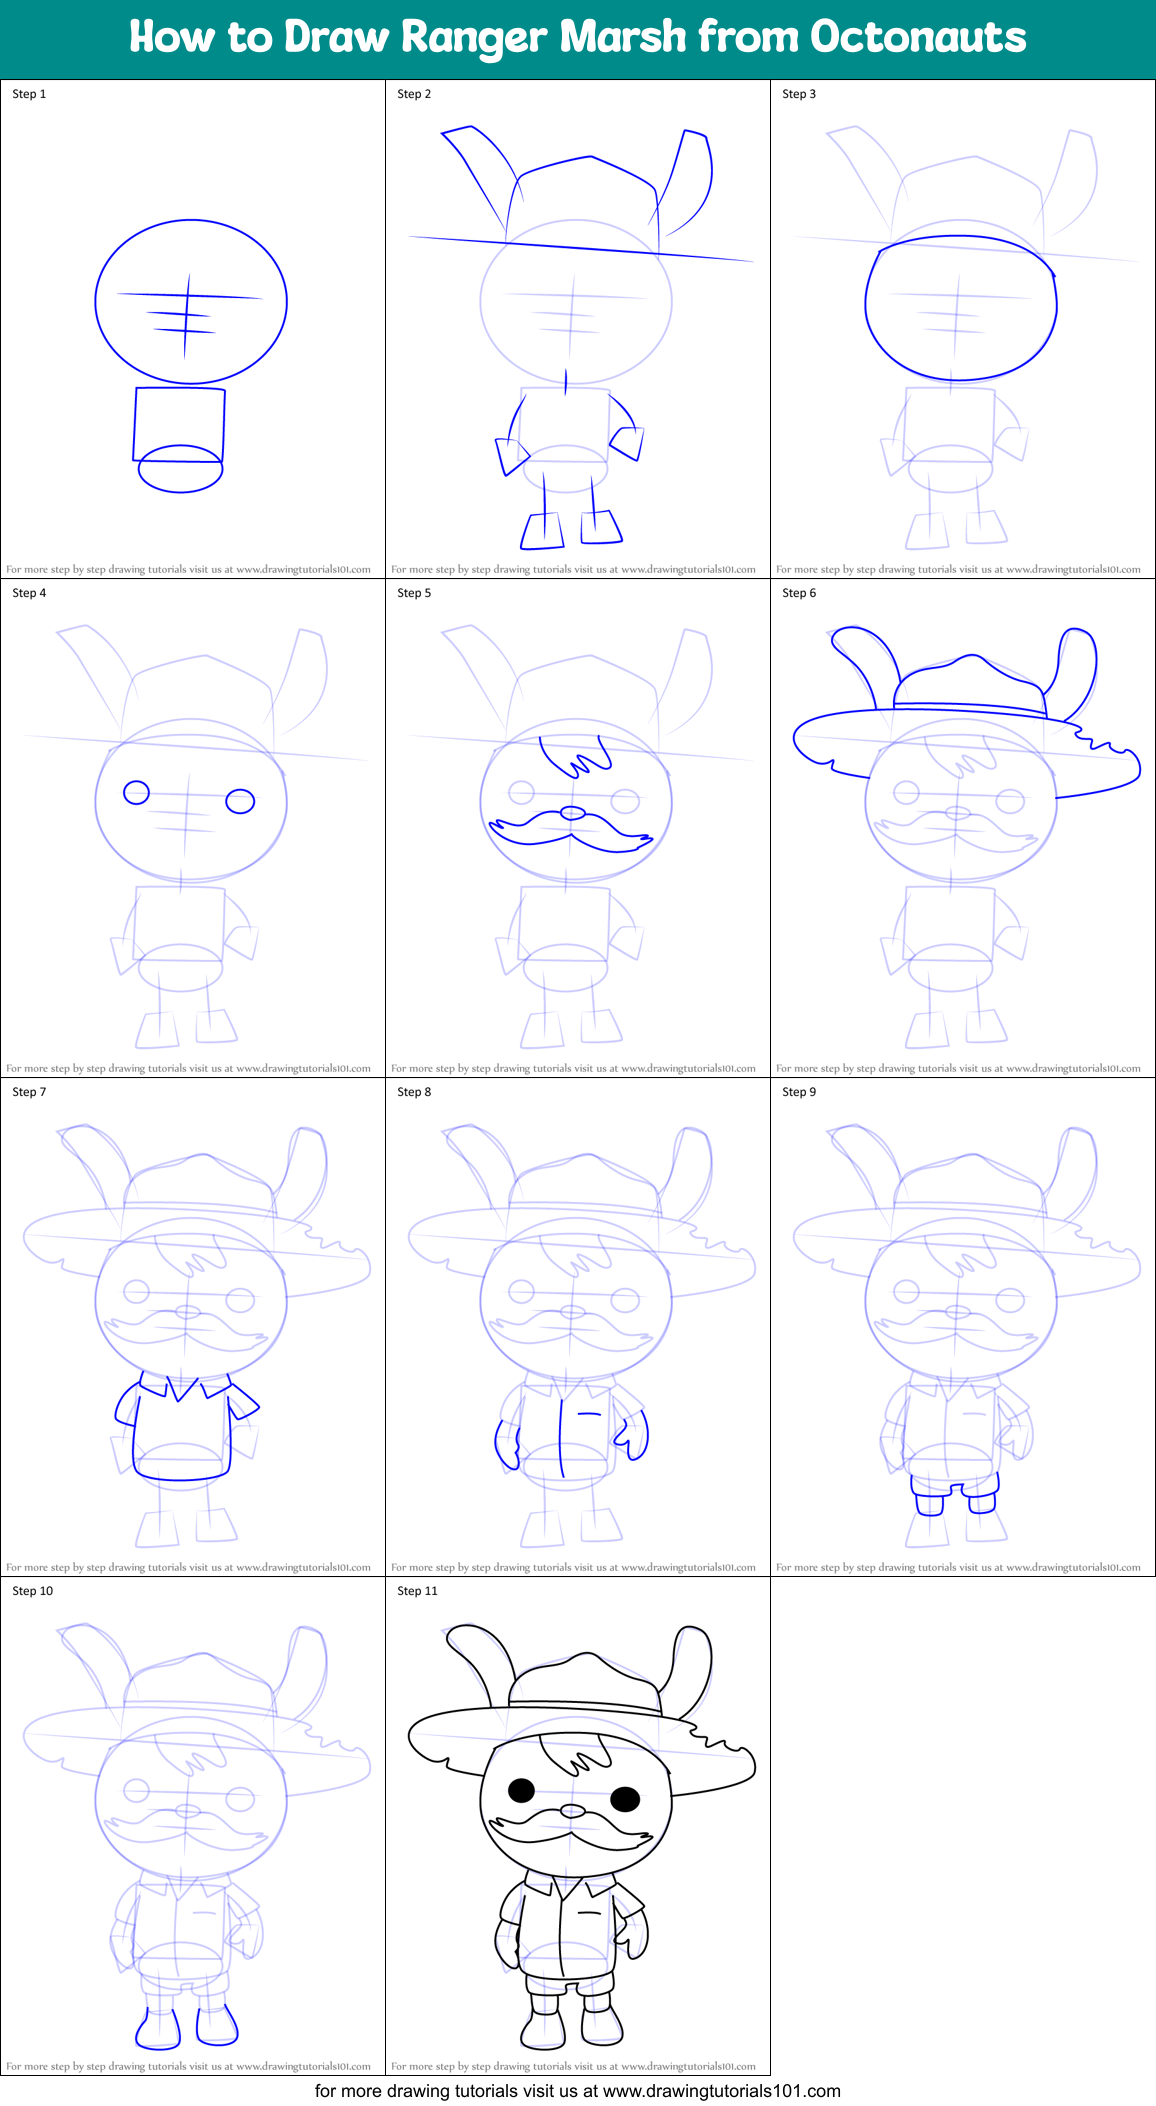 How to Draw Ranger Marsh from Octonauts (Octonauts) Step by Step ...